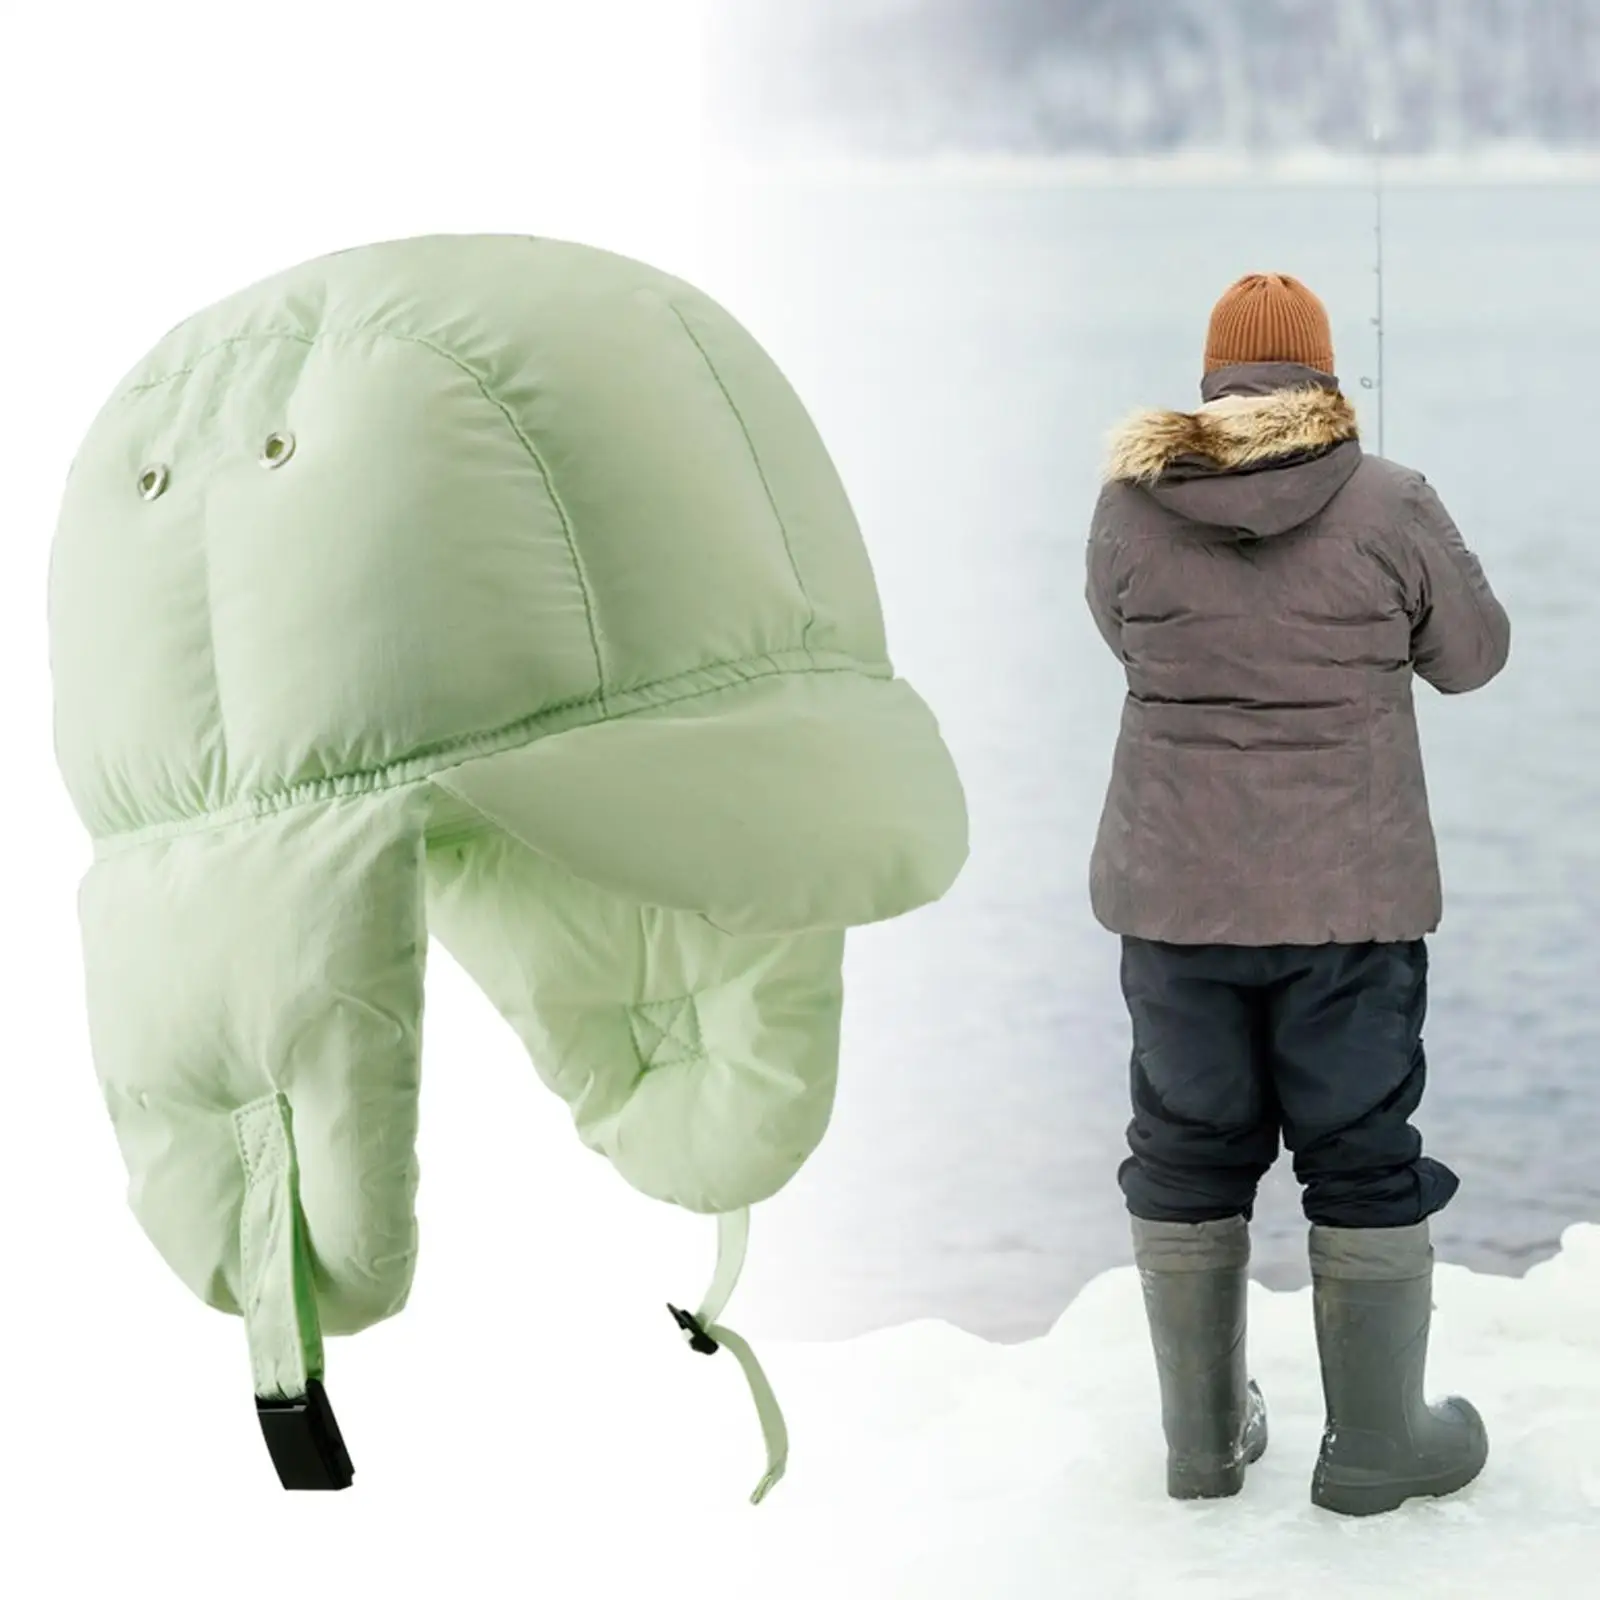 Hat with Earflaps Fashionable Peaked Hat for Women Warm Hat with Visor Winter Hat for Hiking Skiing Cold Weather Skating Camping